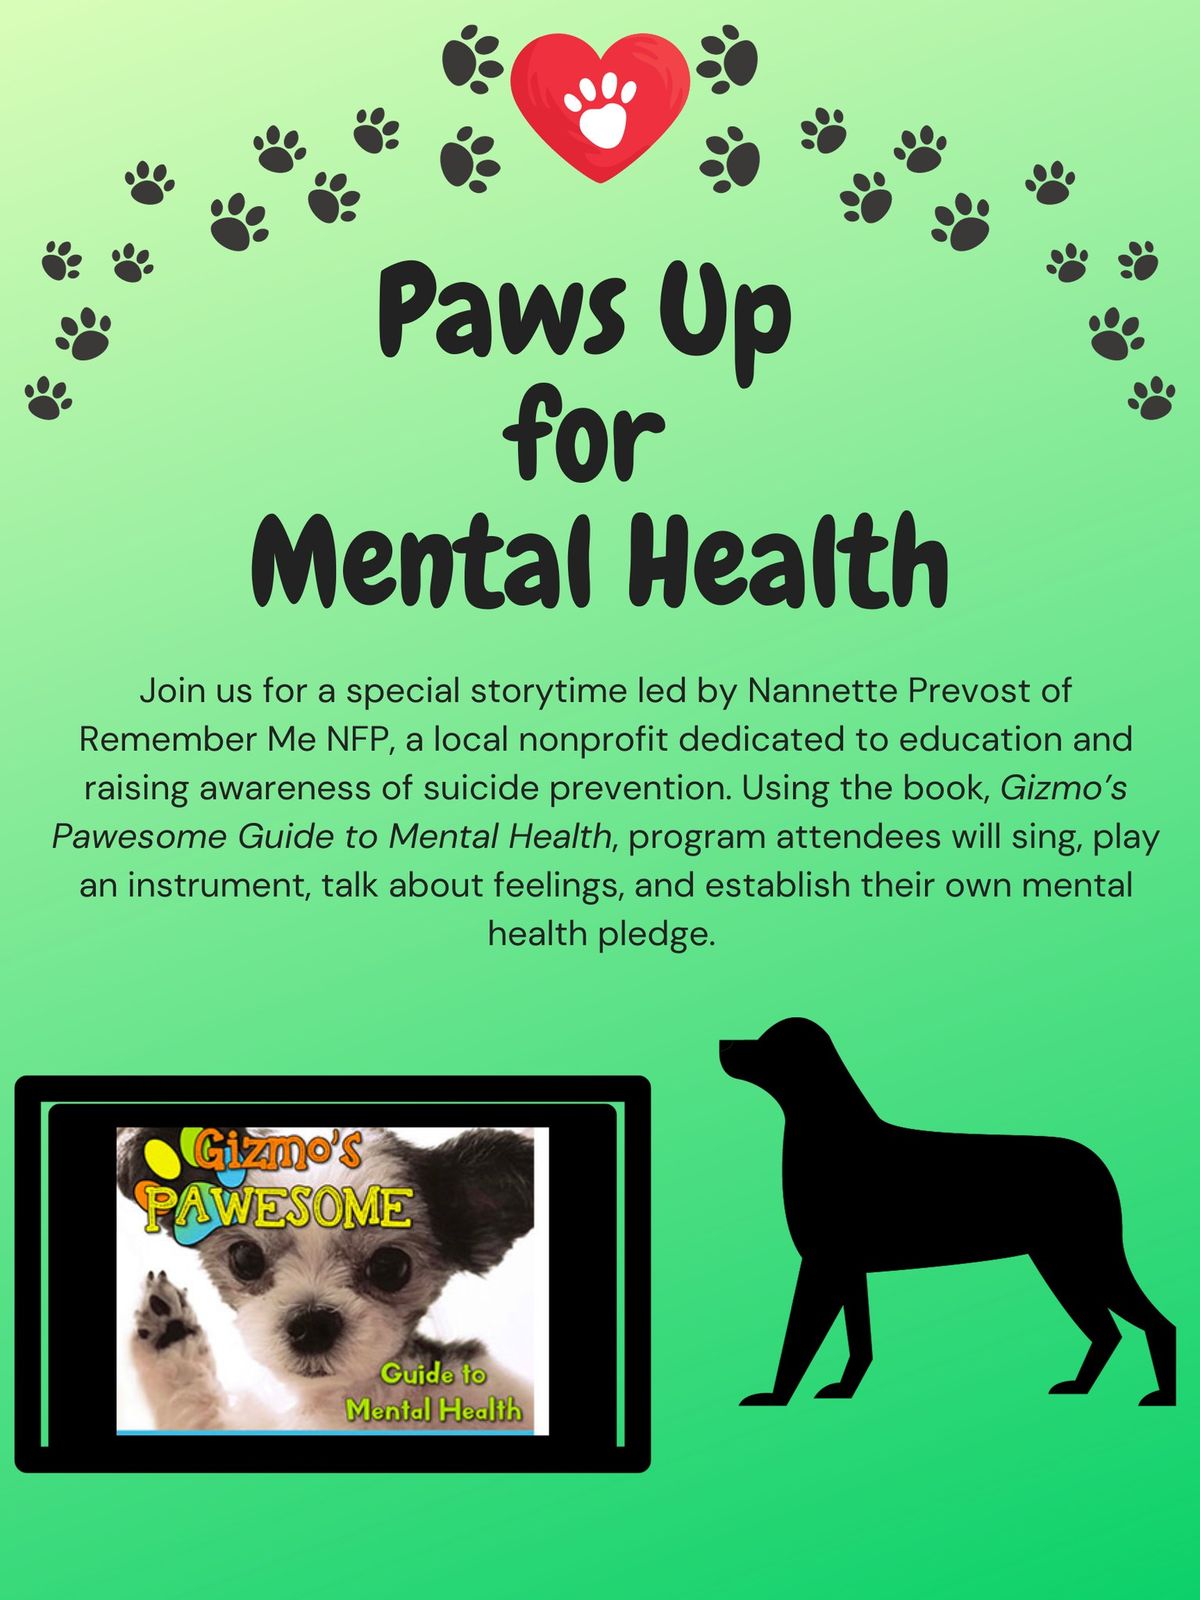 Paws Up for Mental Health @ BayCare Powell Learning Center